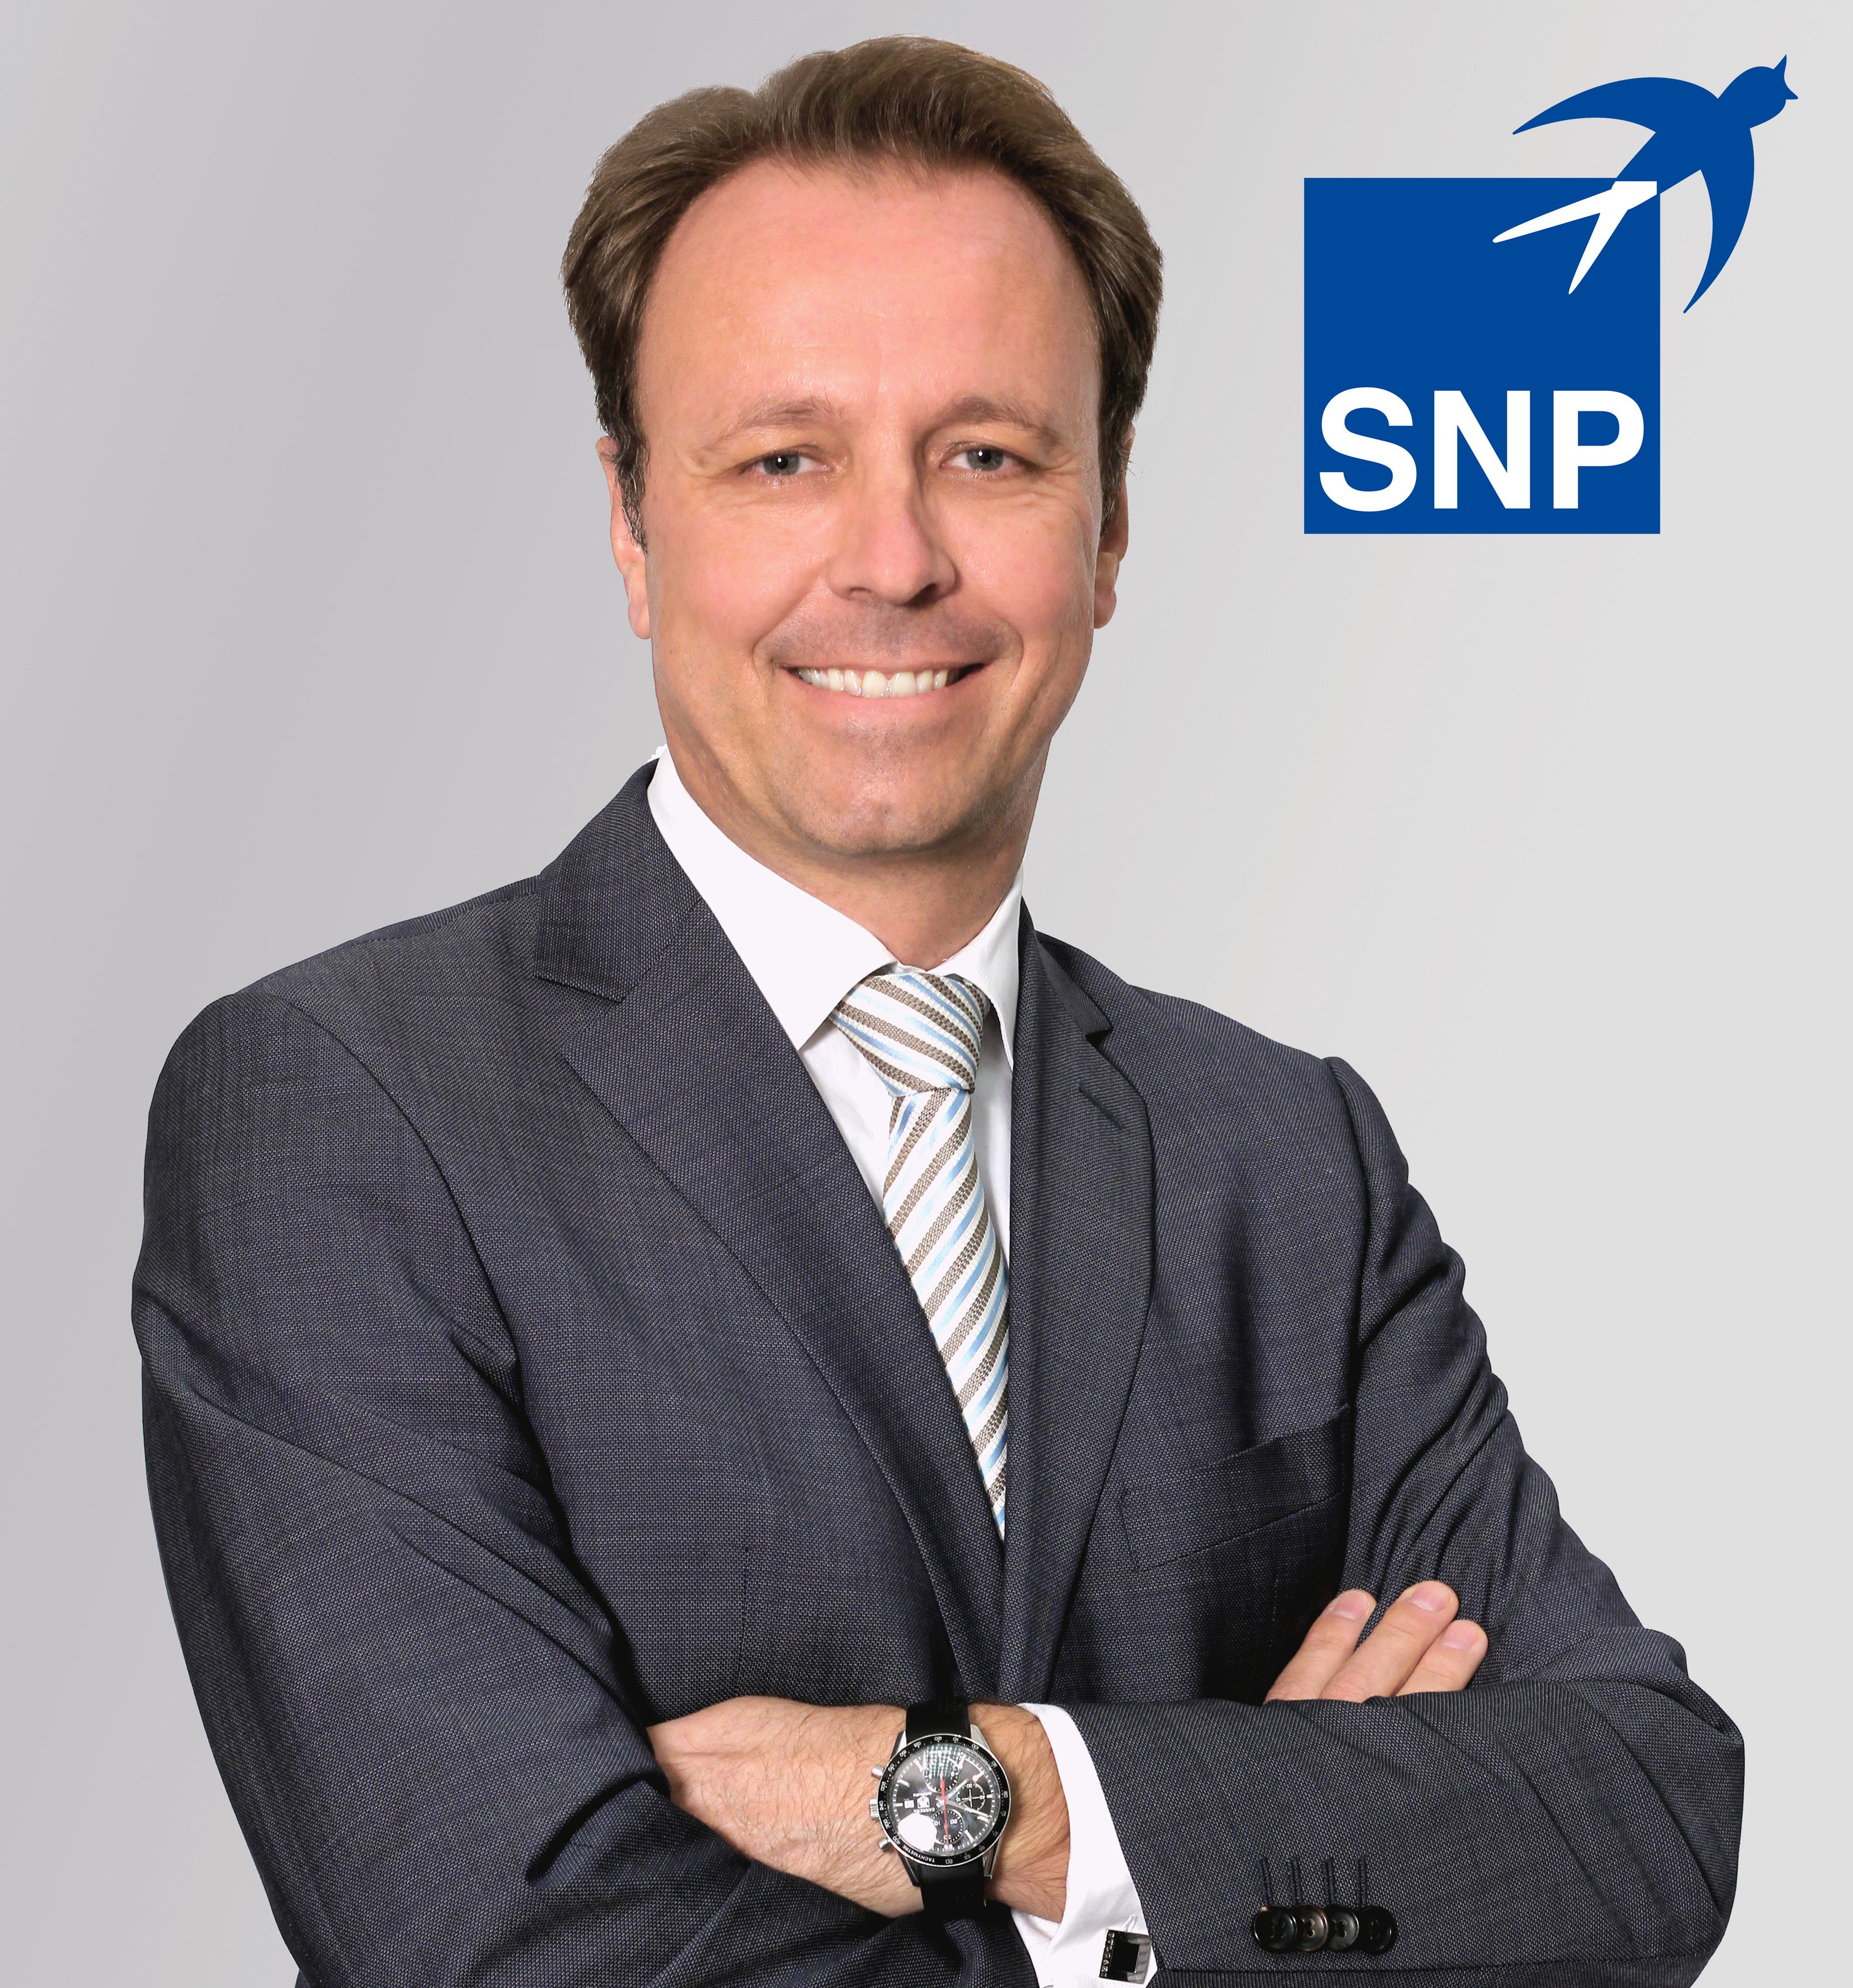 Gerald Faust, managing director and CEO of SNP Asia-Pacific and the Middle East